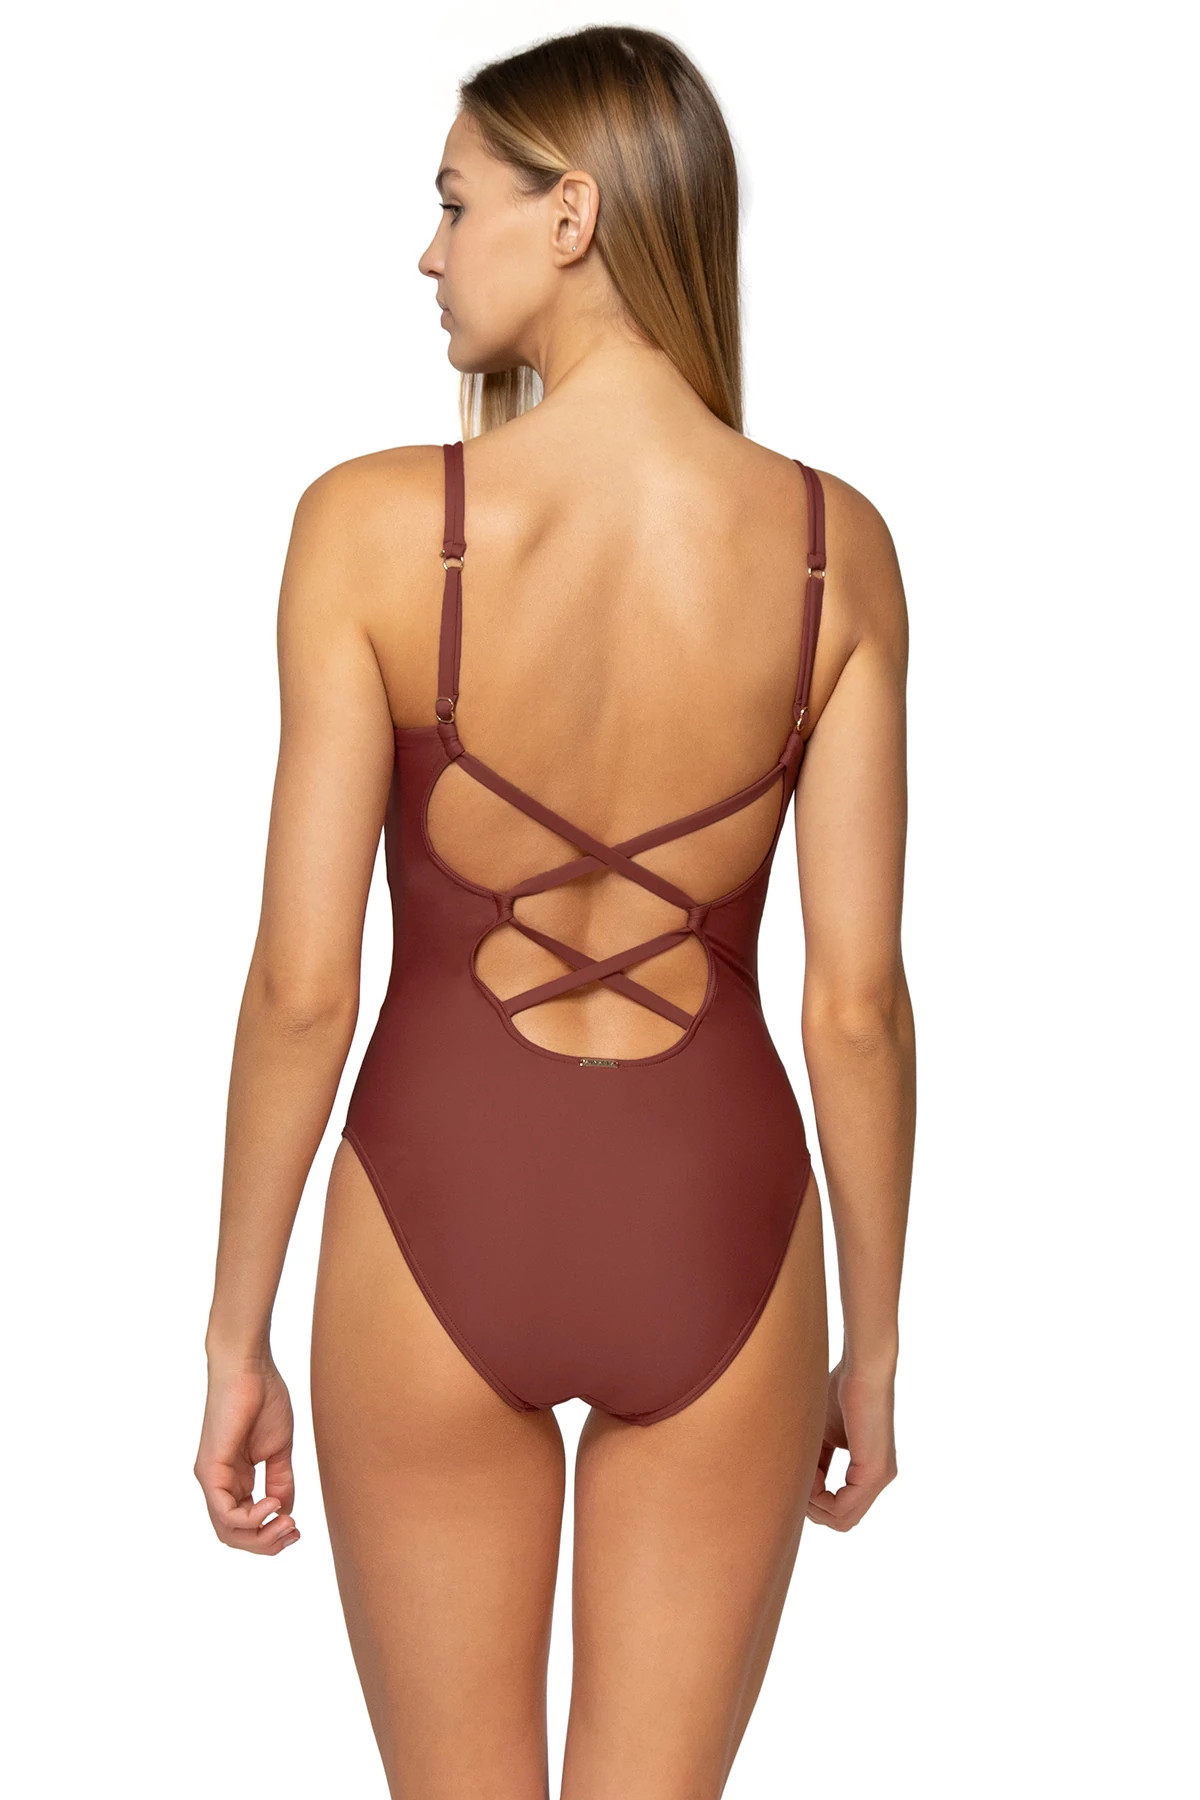 TUSCAN RED Veronica Over The Shoulder One Piece Swimsuit image number 2